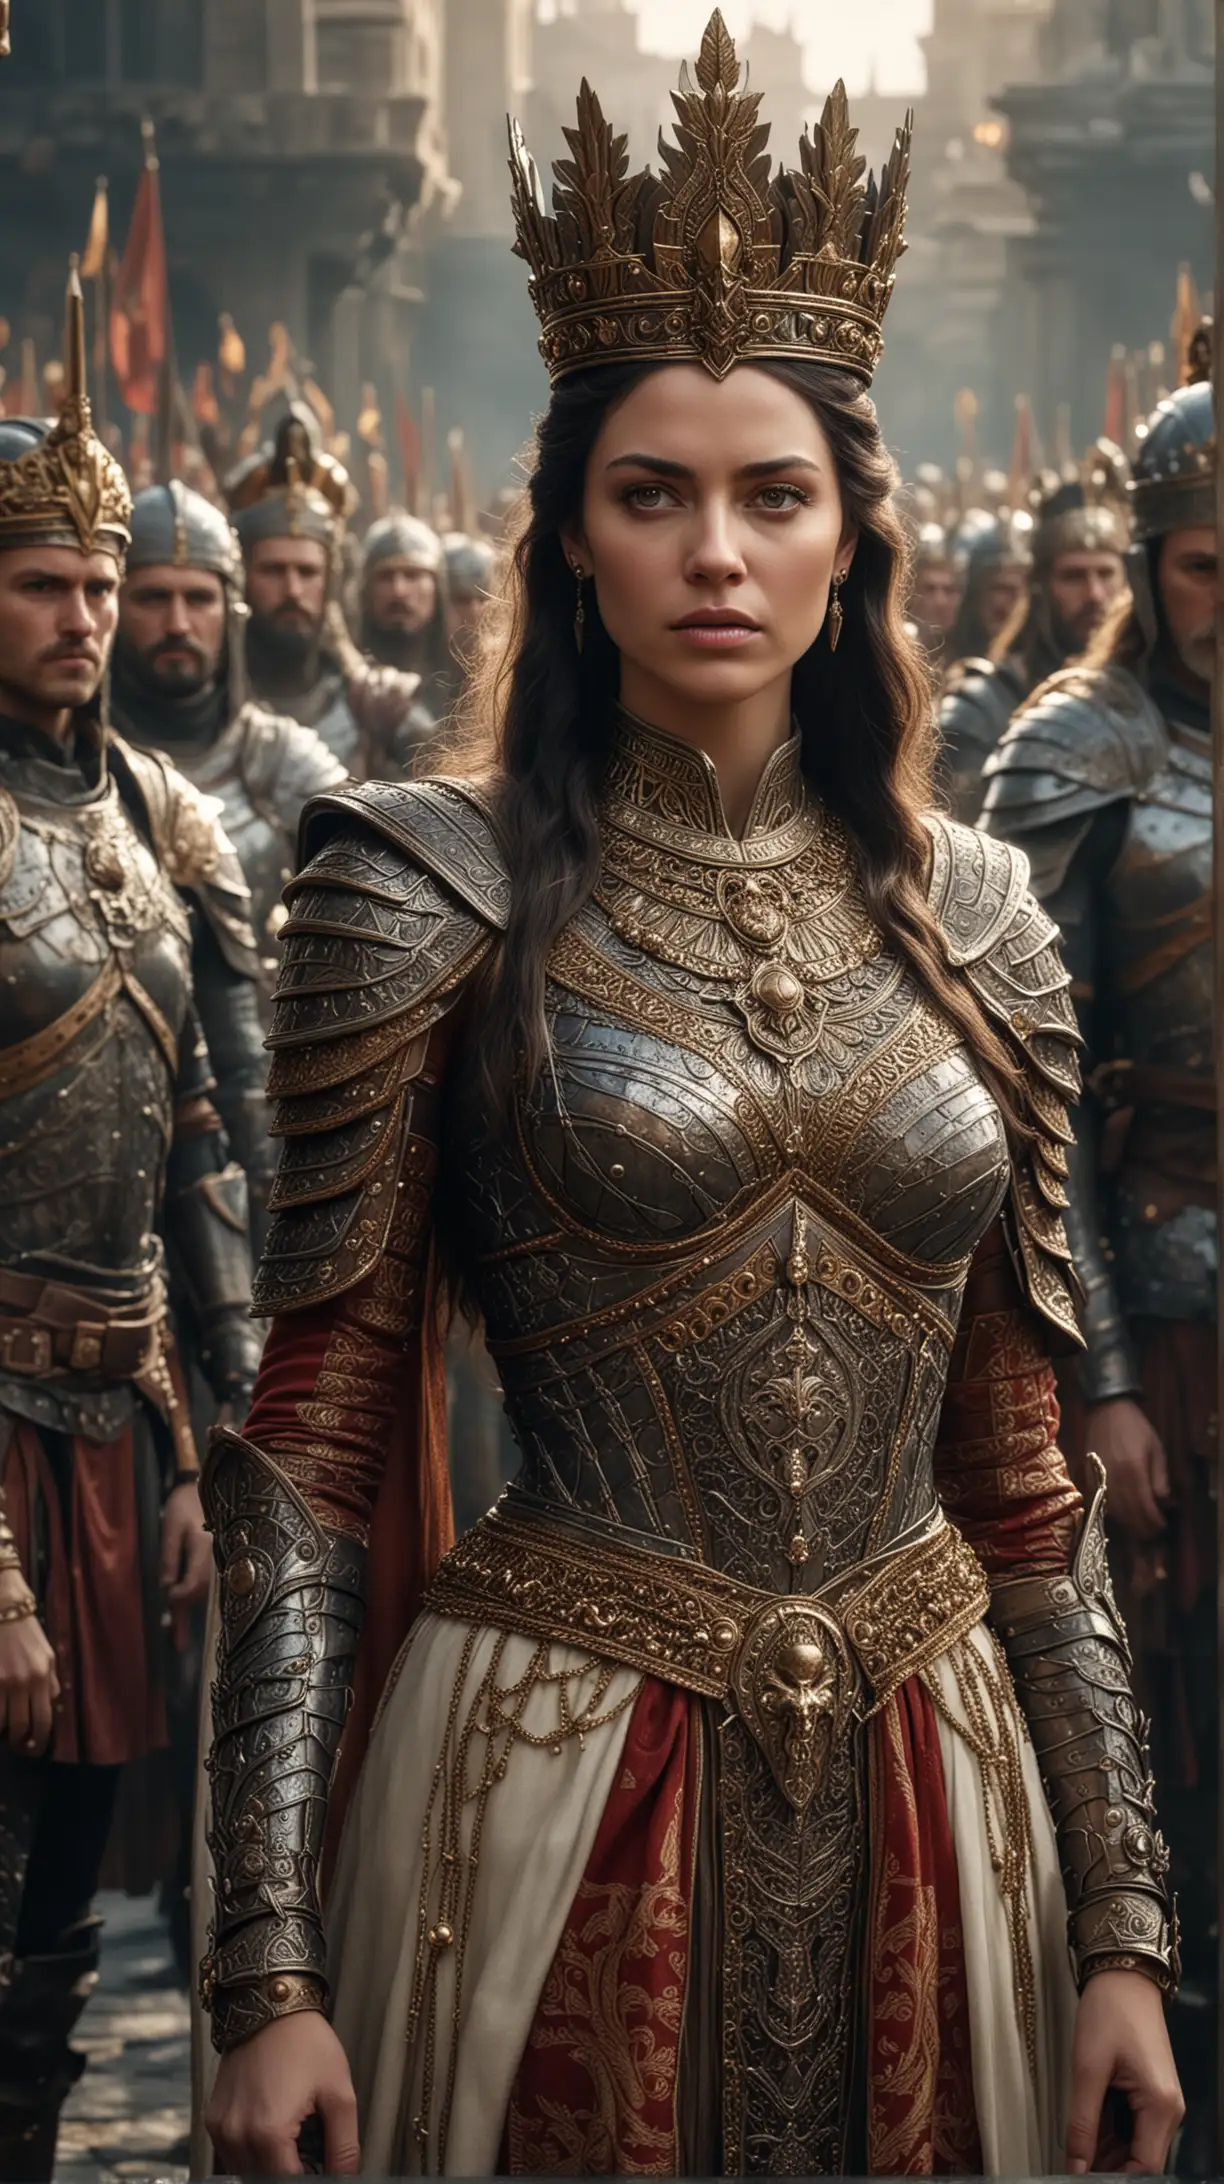 Focus on Queen Tomyris herself, standing tall and proud in the center of the frame. She wears ornate armor and a crown, her expression fierce and determined as she commands her troops. hyper realistic